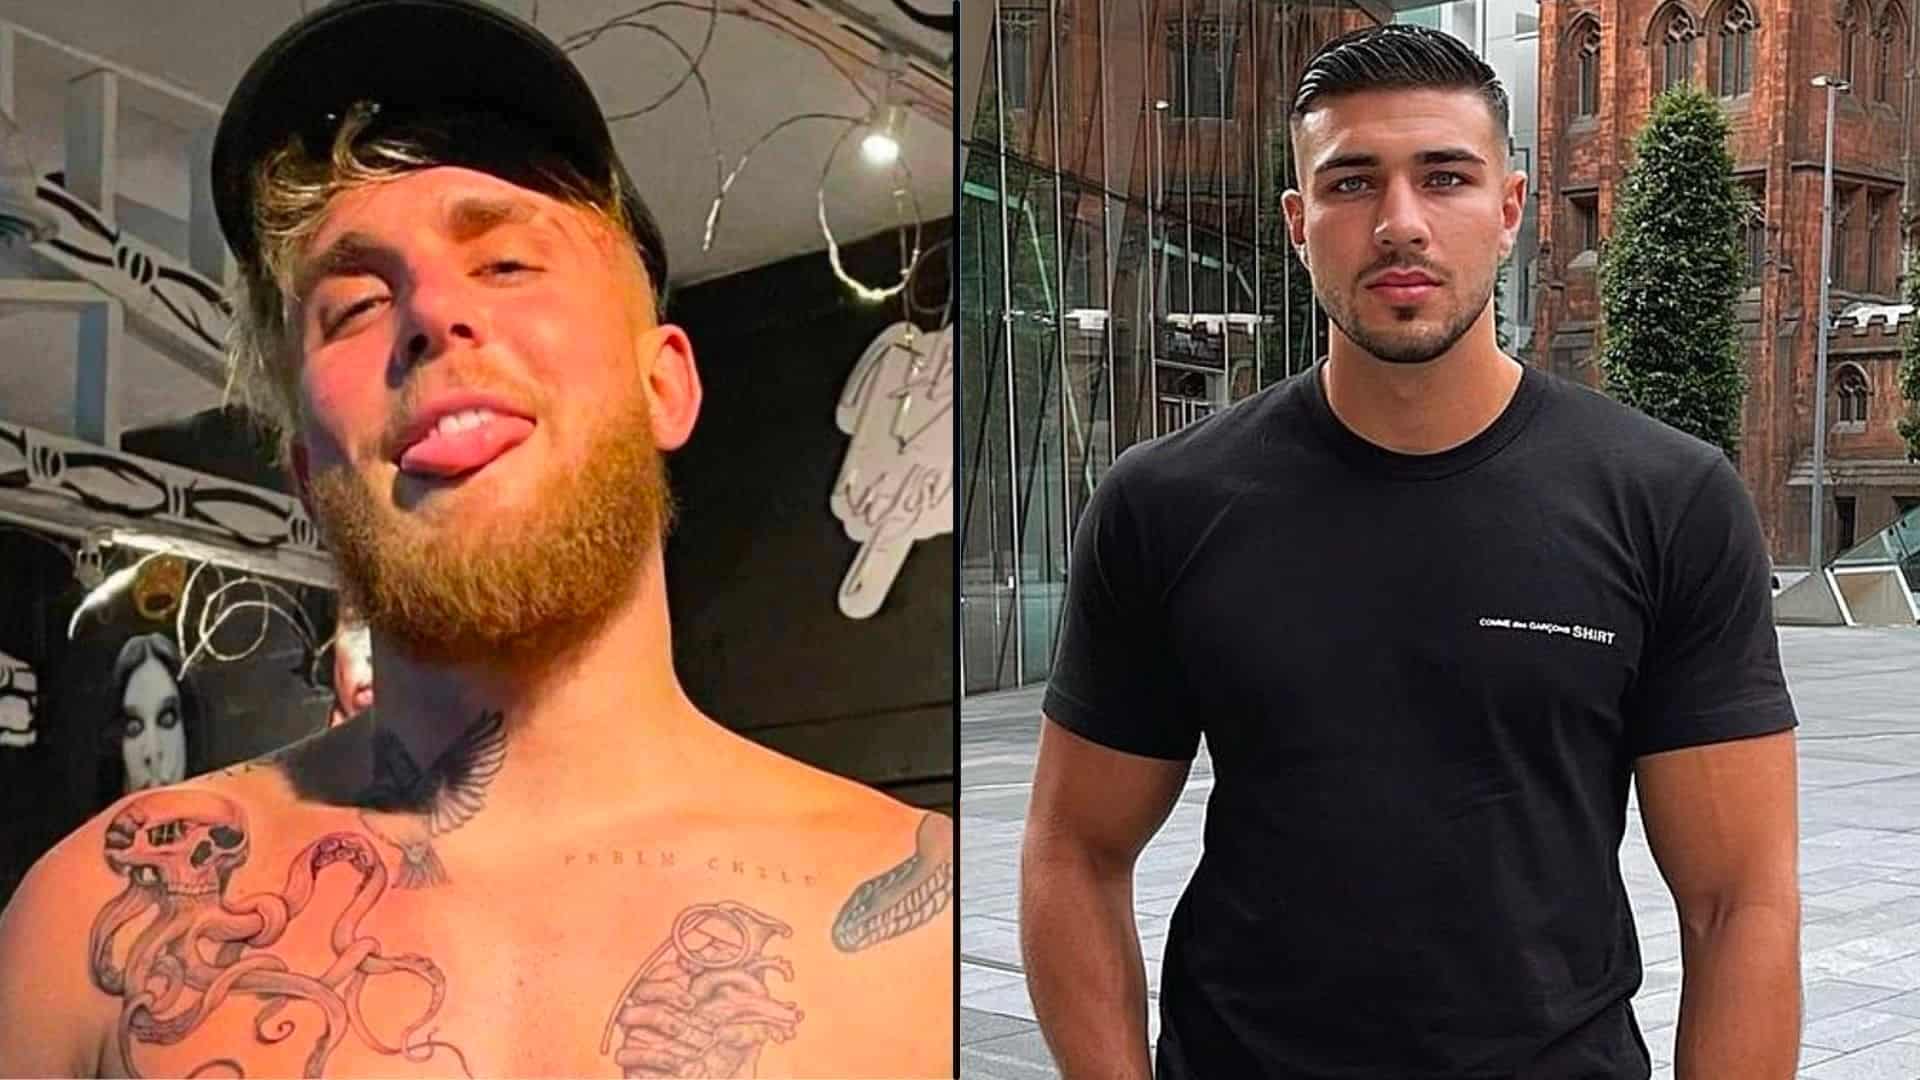 Jake Paul side-by-side with Tommy Fury outside